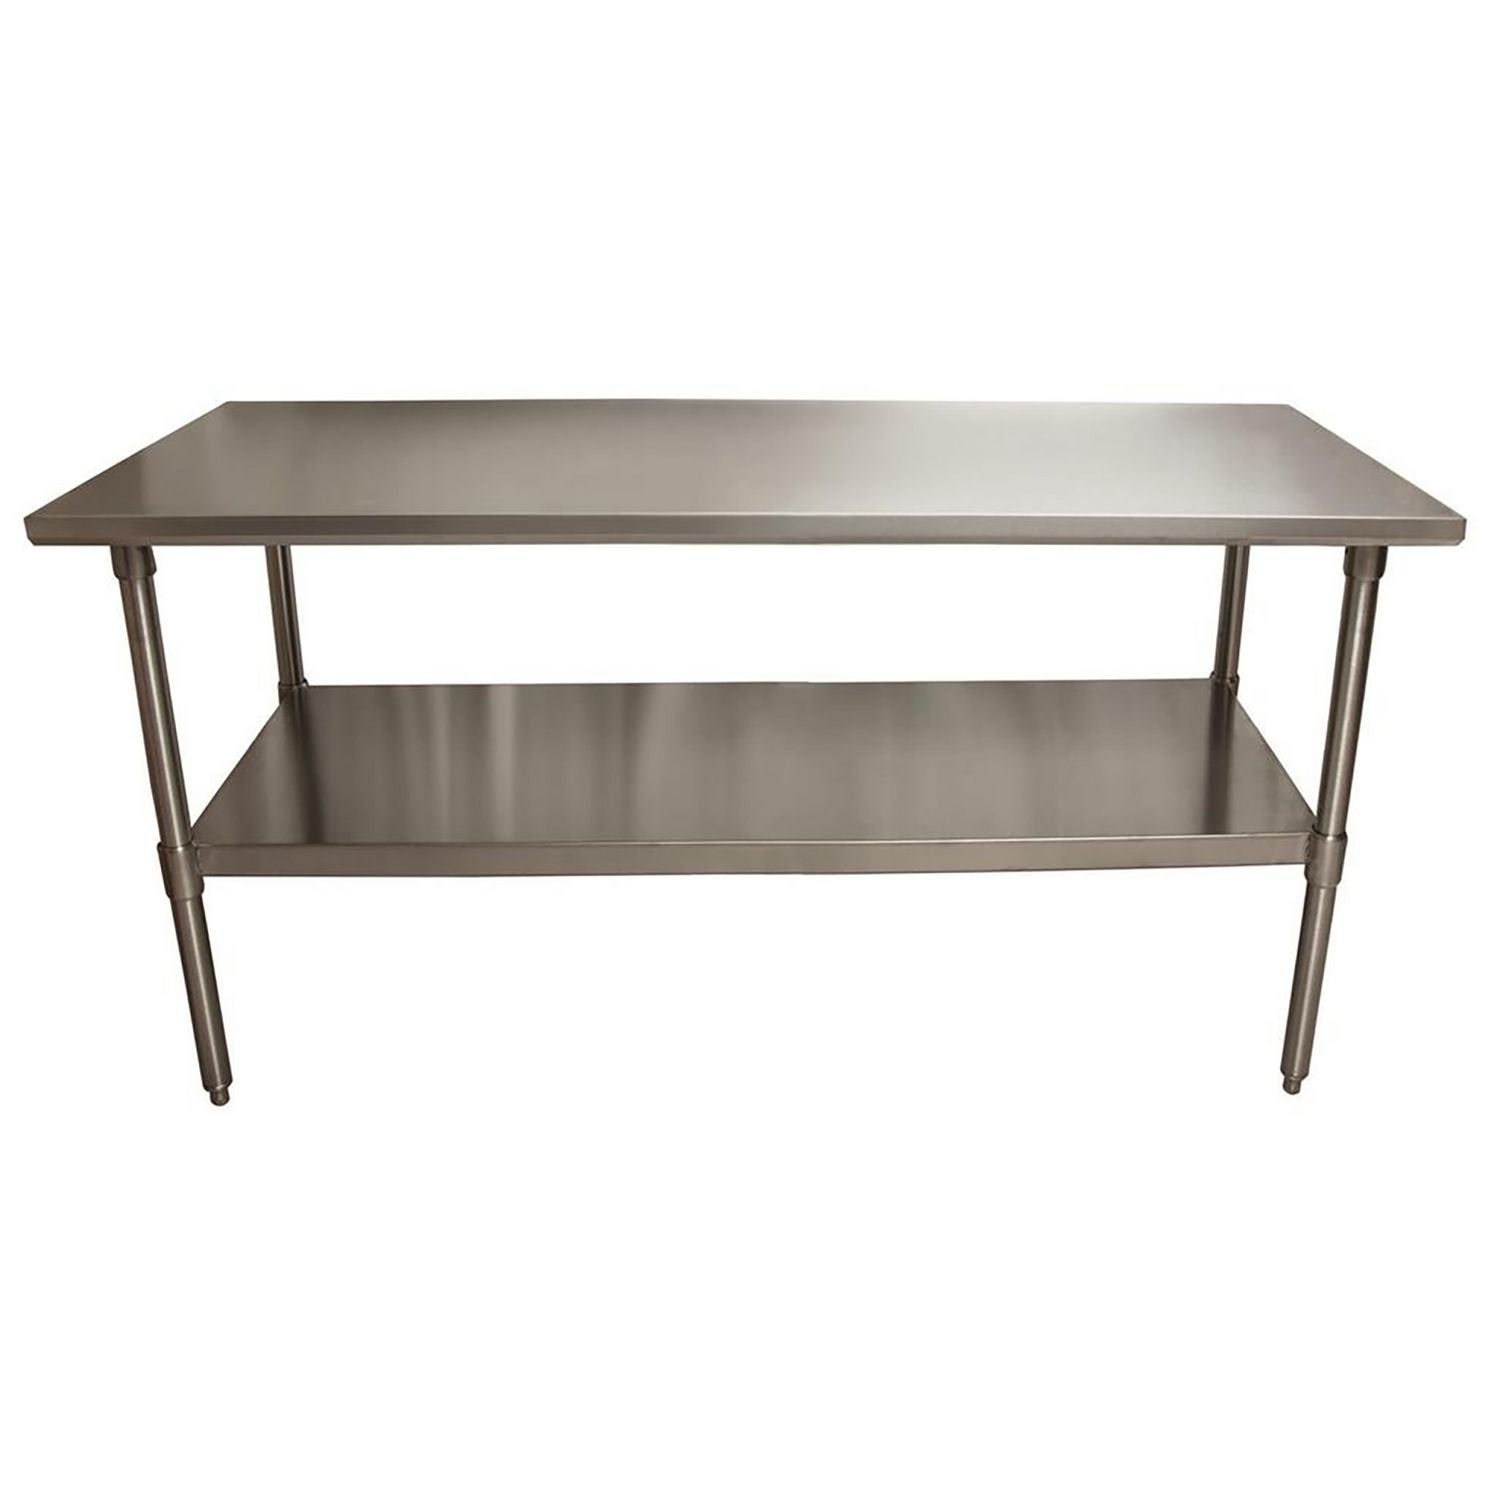 stainless-steel-flat-top-work-tables-72w-x-30d-x-36h-silver-2-pallet-ships-in-4-6-business-days_bke2vt7230 - 7